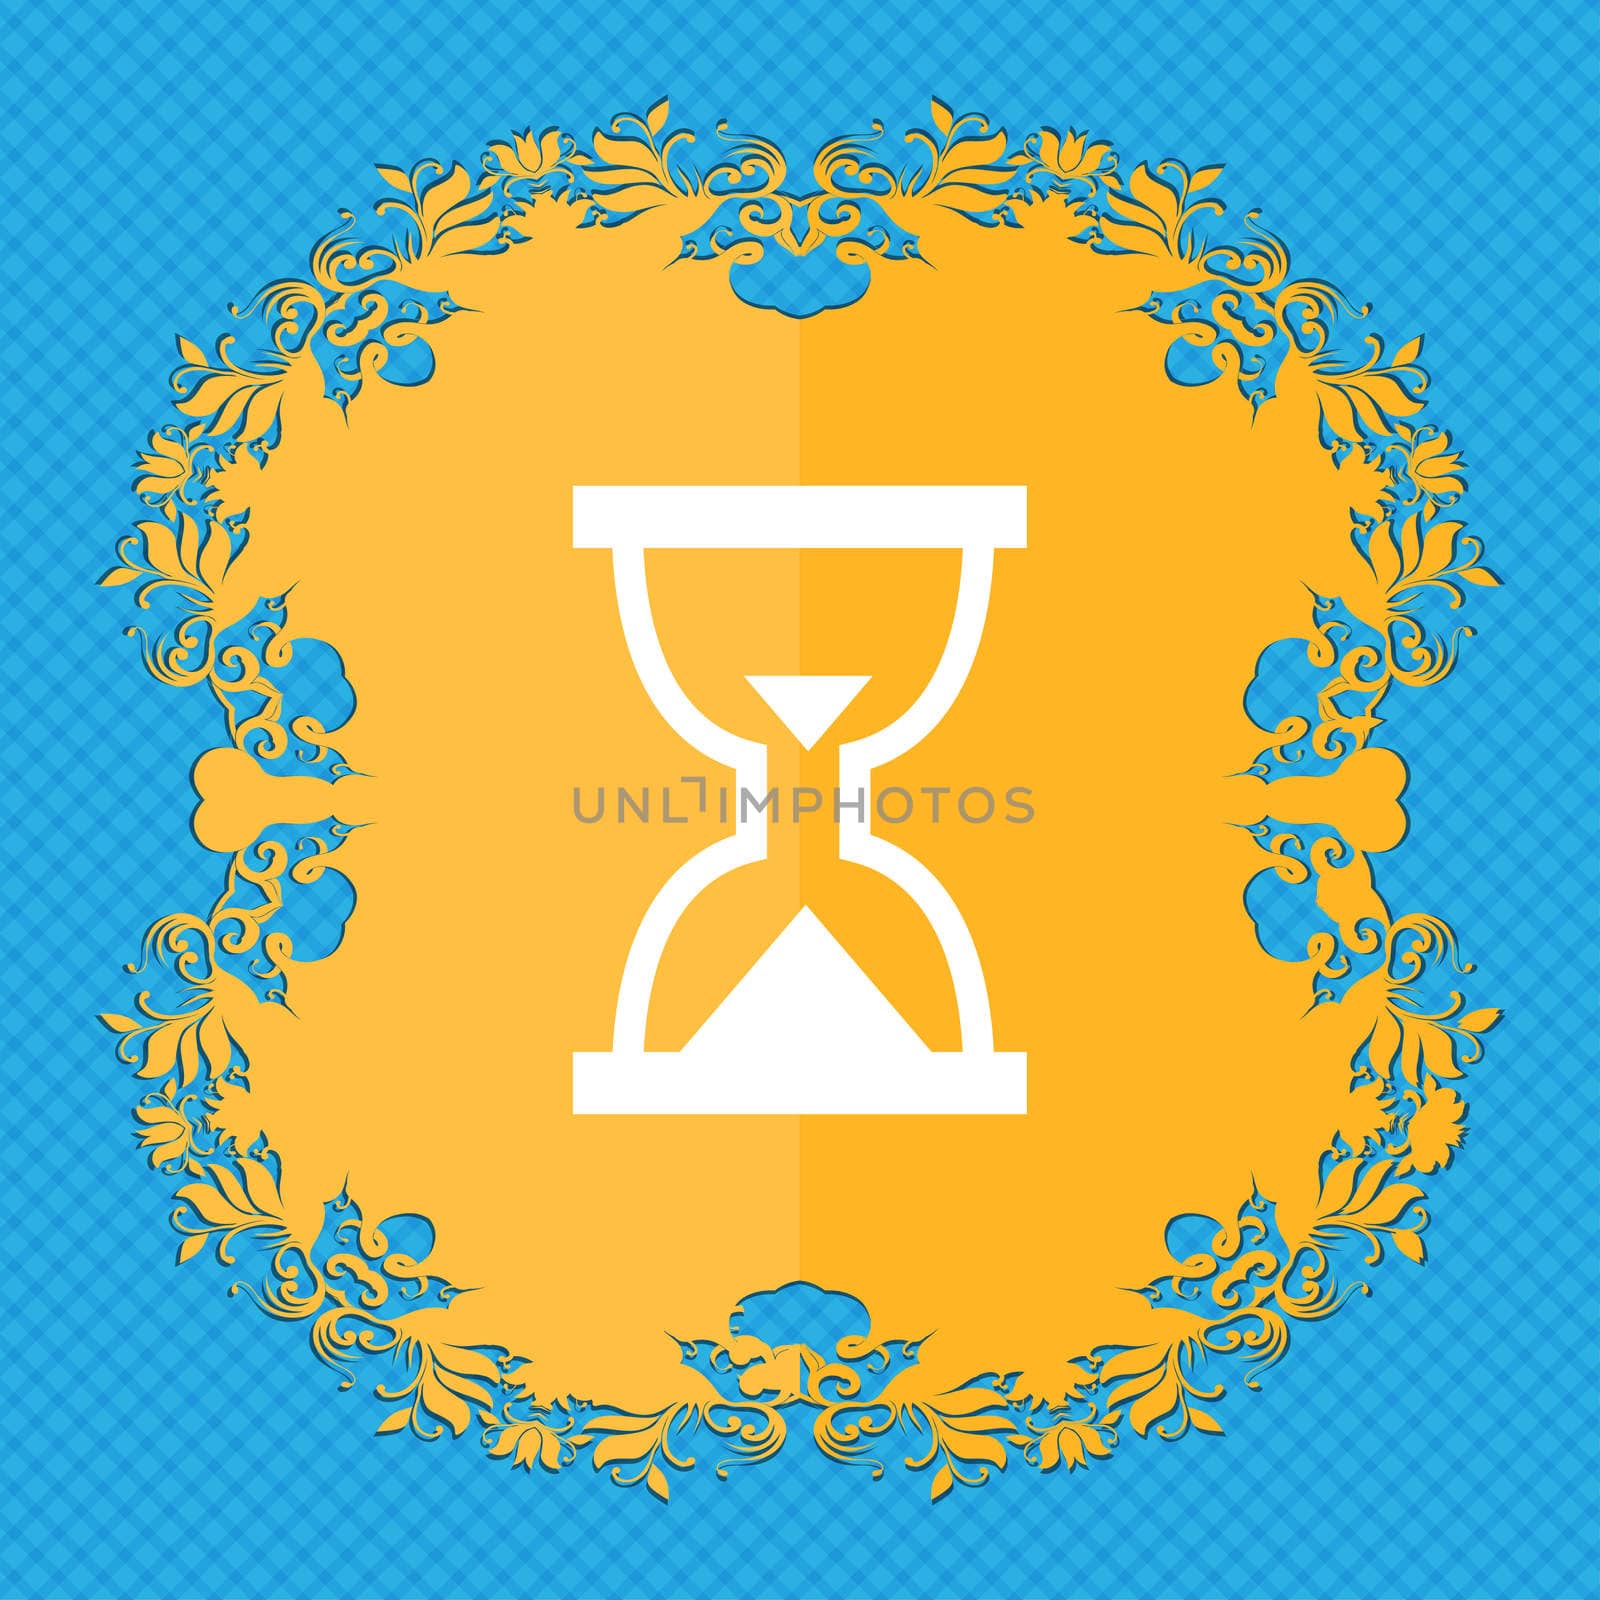 Hourglass, Sand timer . Floral flat design on a blue abstract background with place for your text. illustration